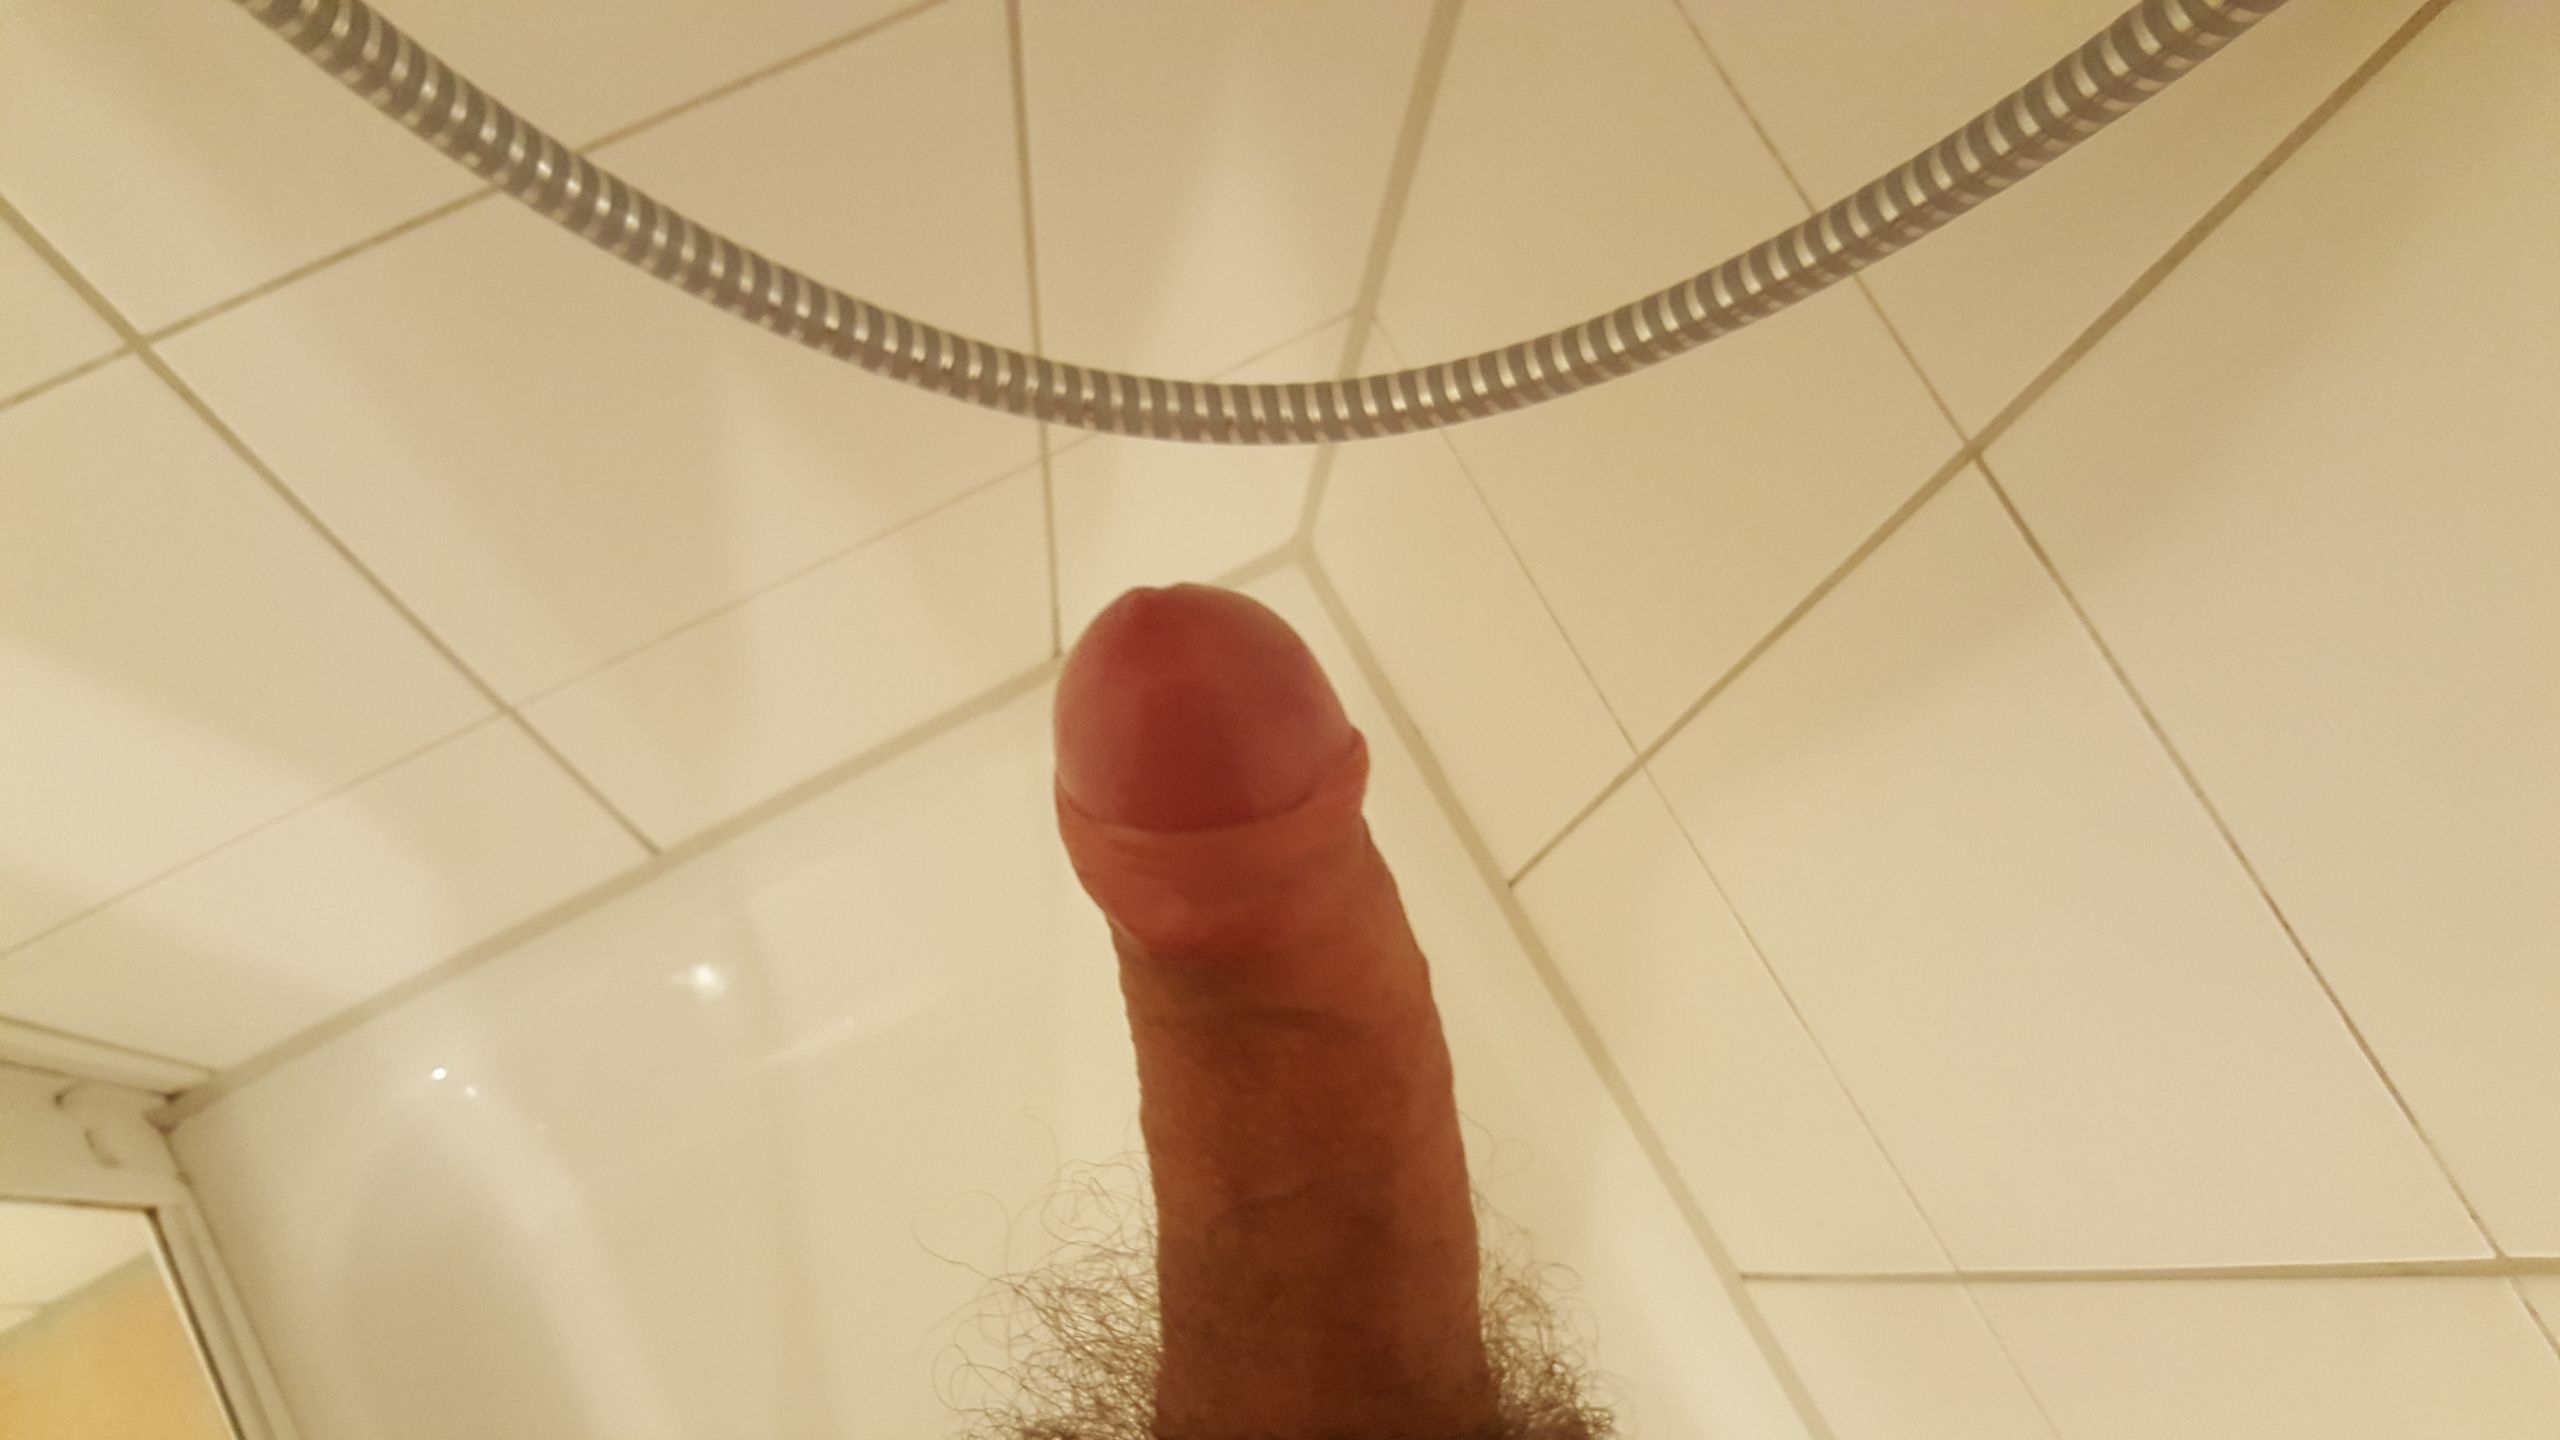 Playing myself in the hotel shower